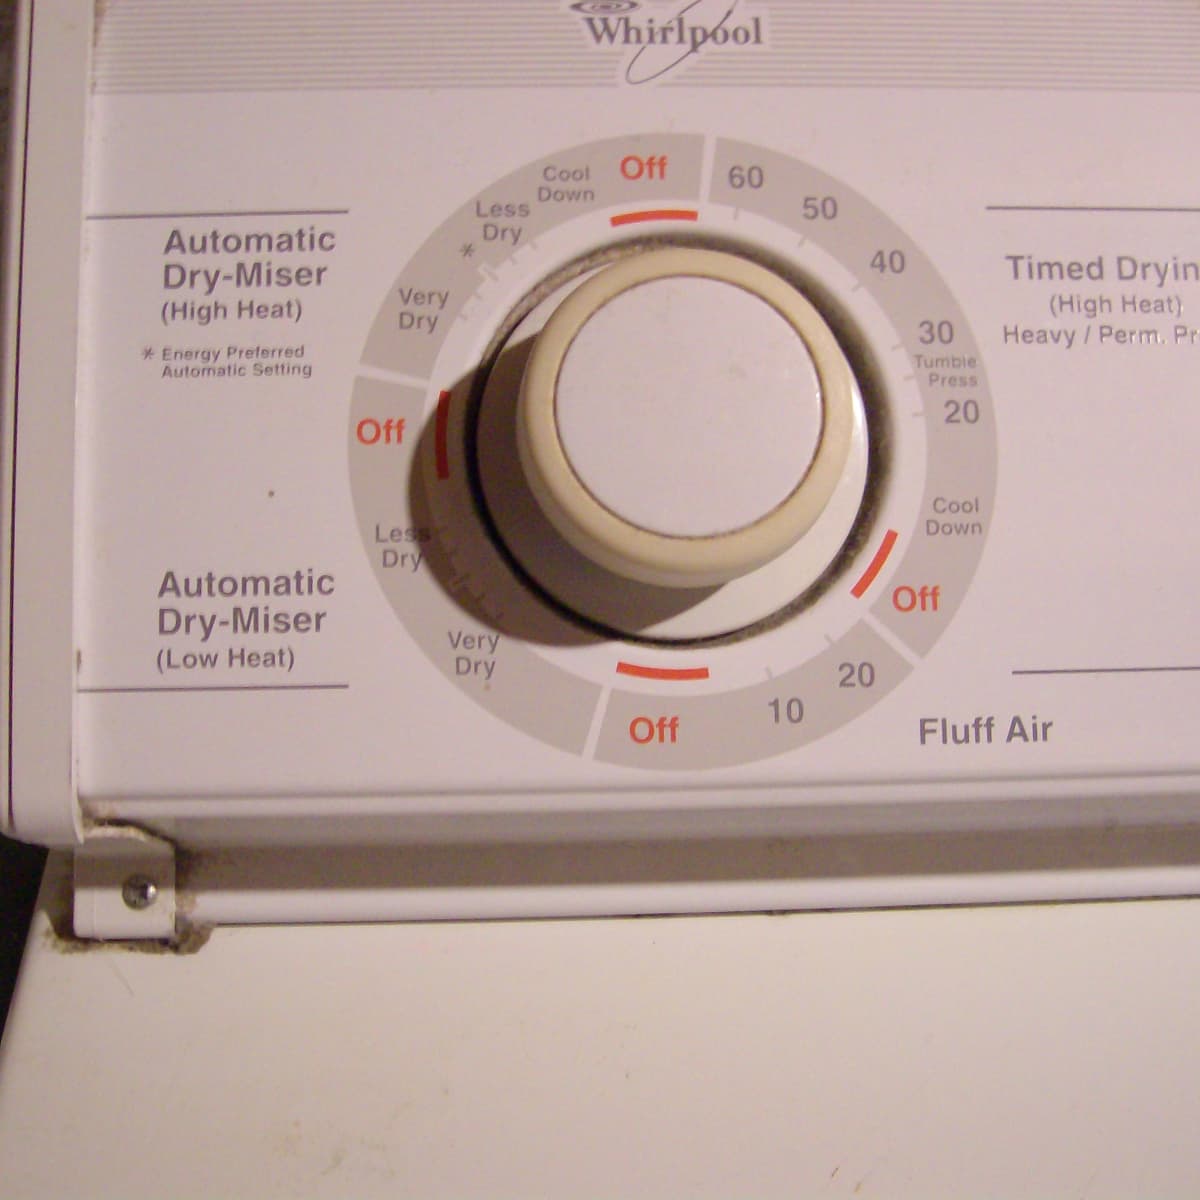 Whirlpool Washer Model Numbers